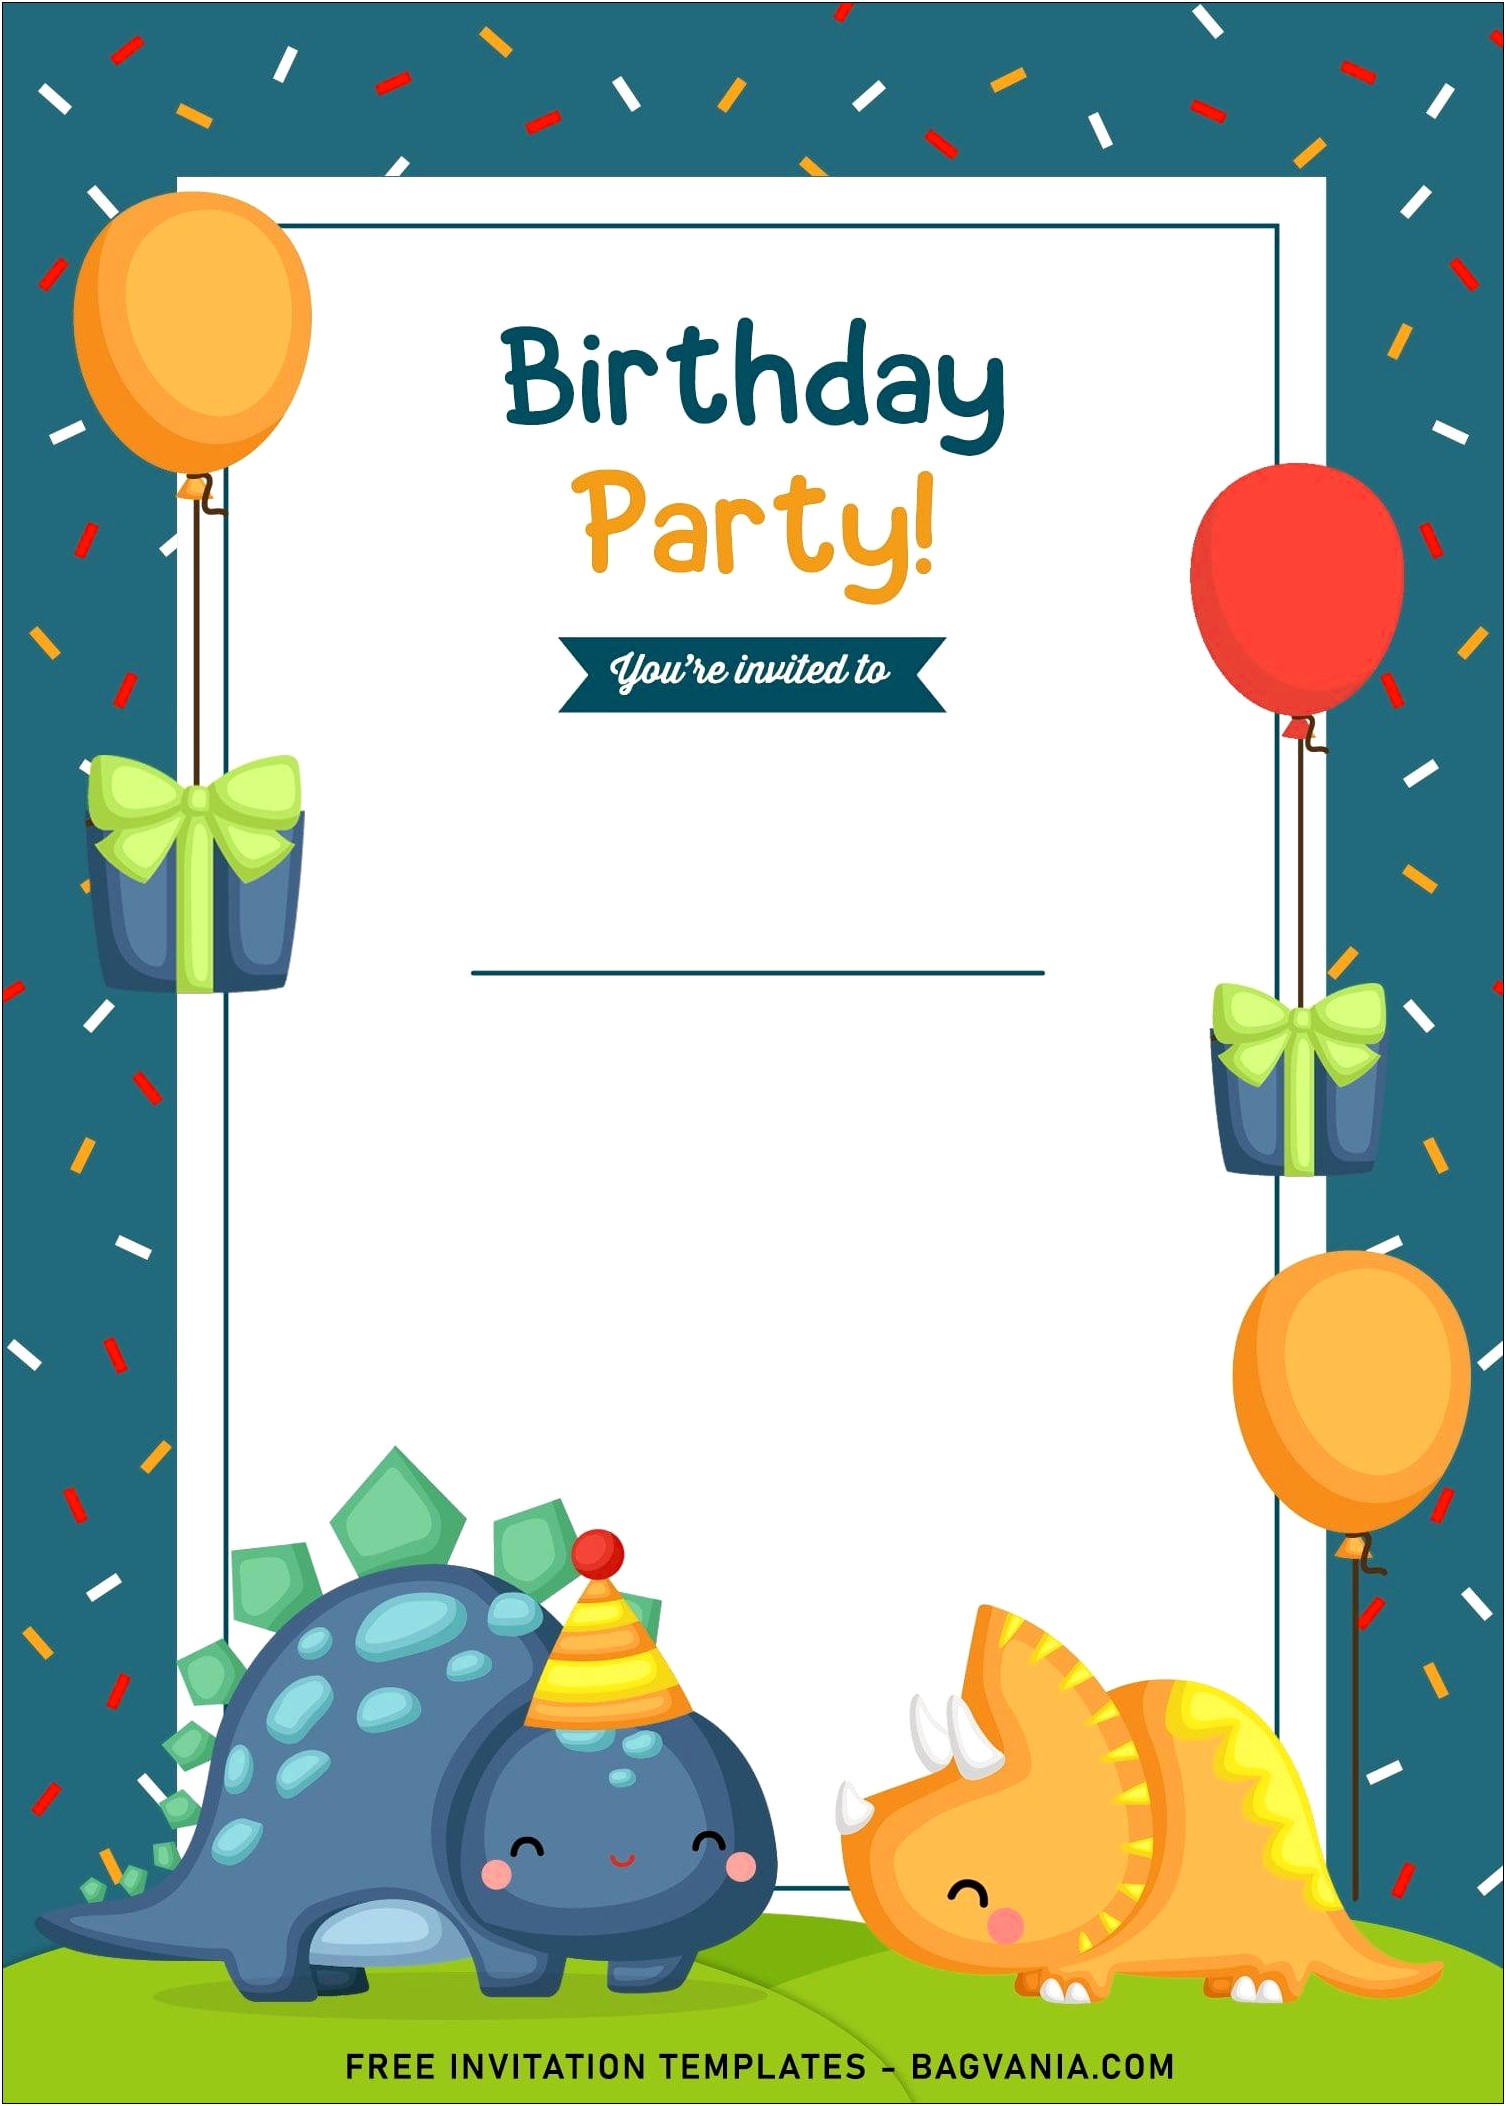 Free Invitation For Birthday Party Template